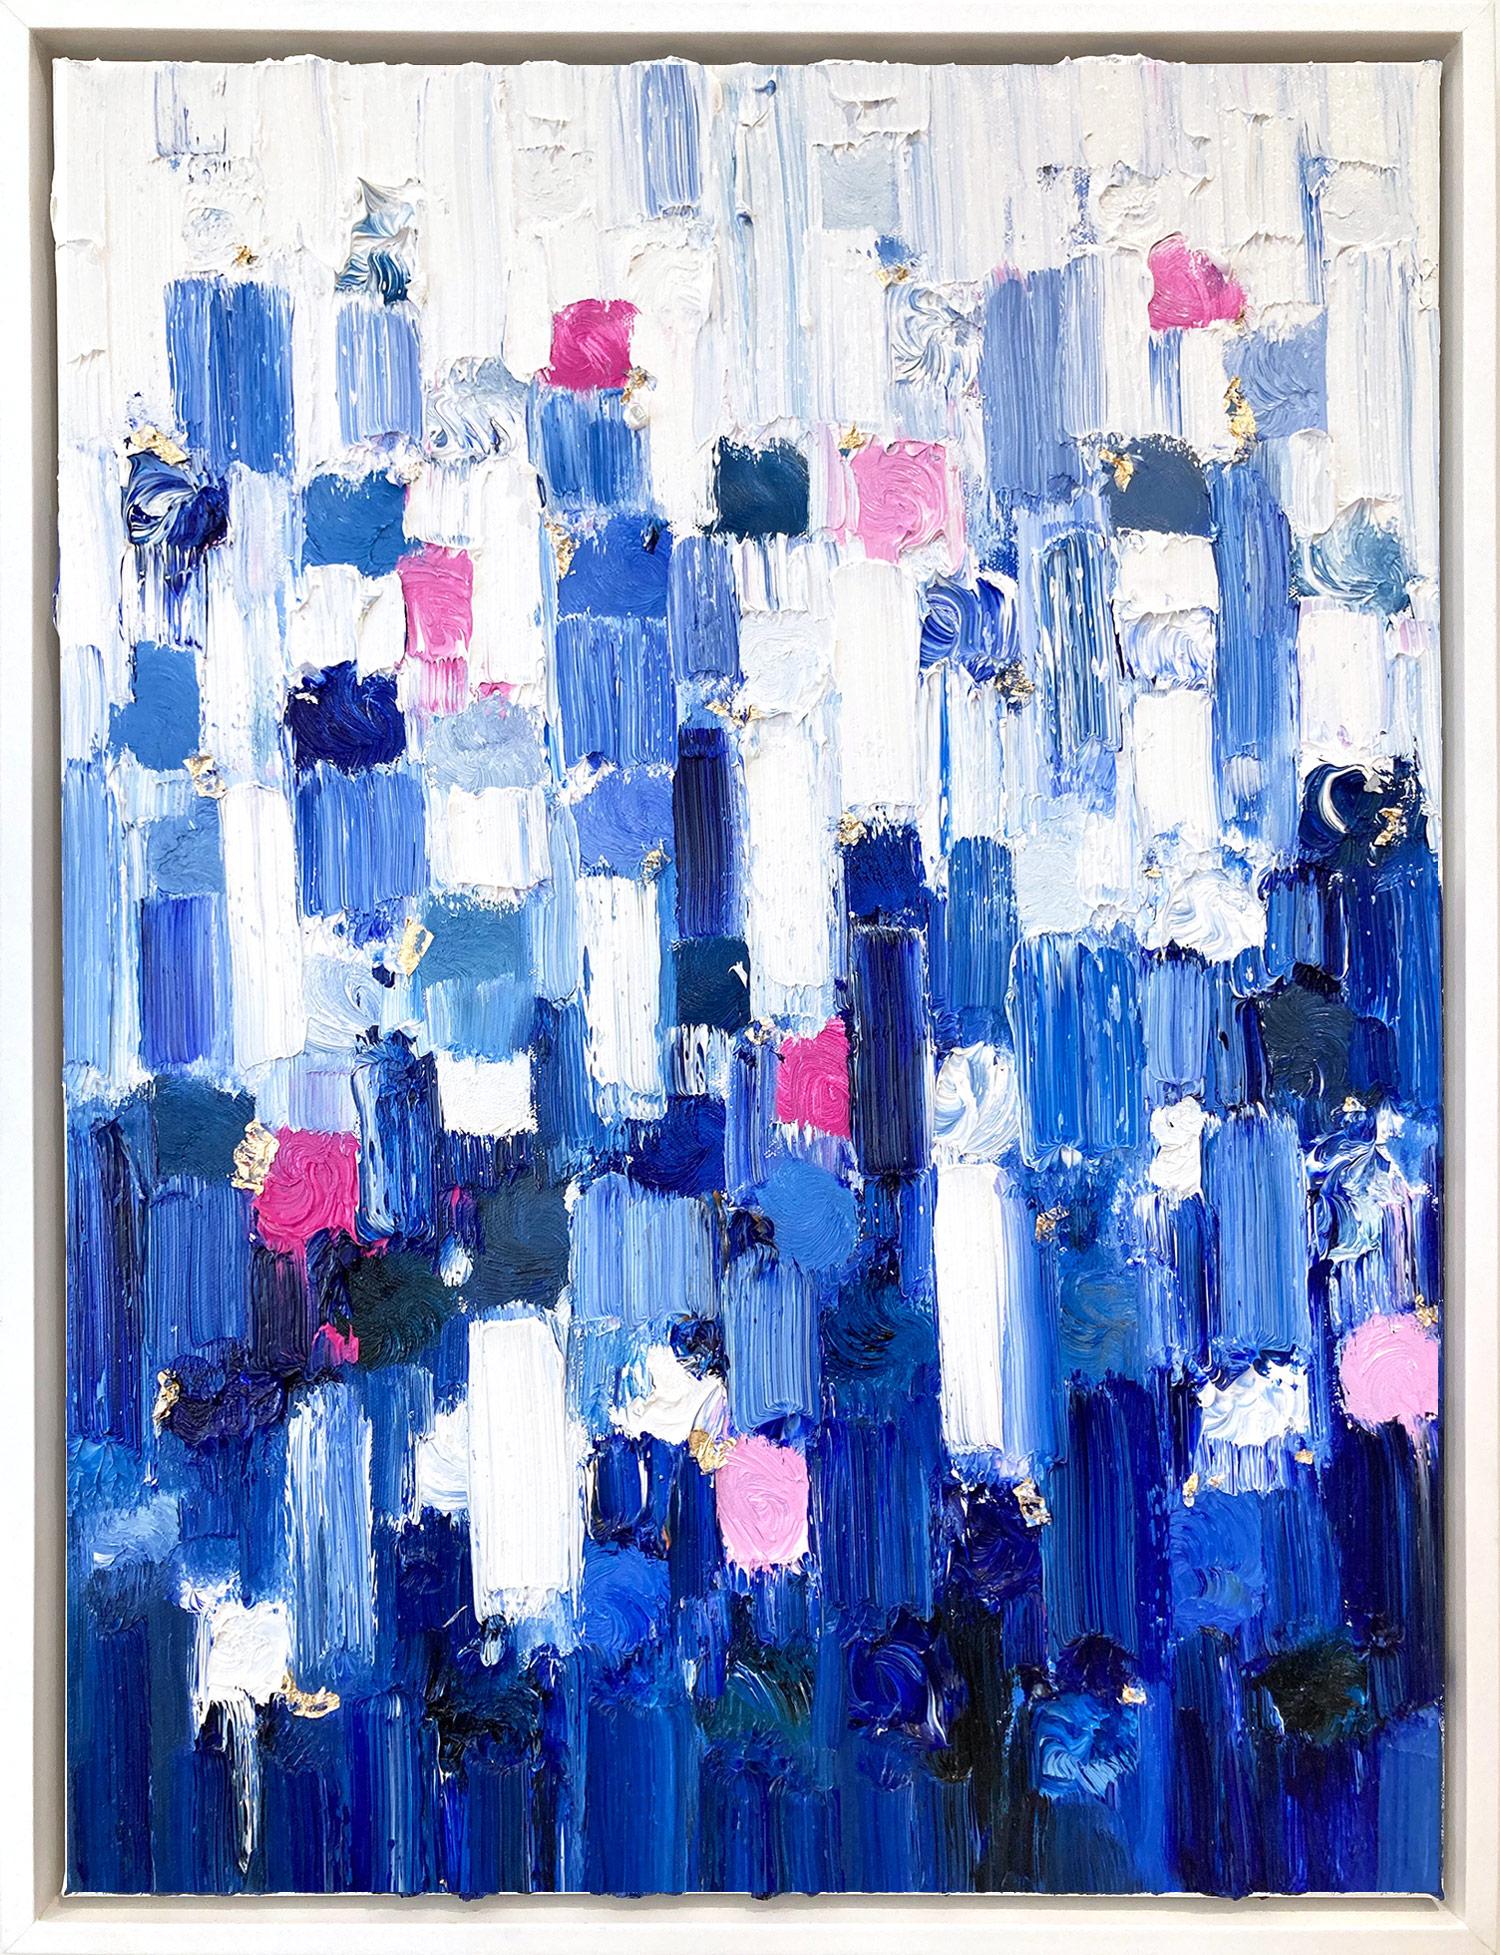 Cindy Shaoul Abstract Painting - "Dripping Dots - Gramercy" Blue & Pink Gradient Abstract Oil Painting on Canvas 